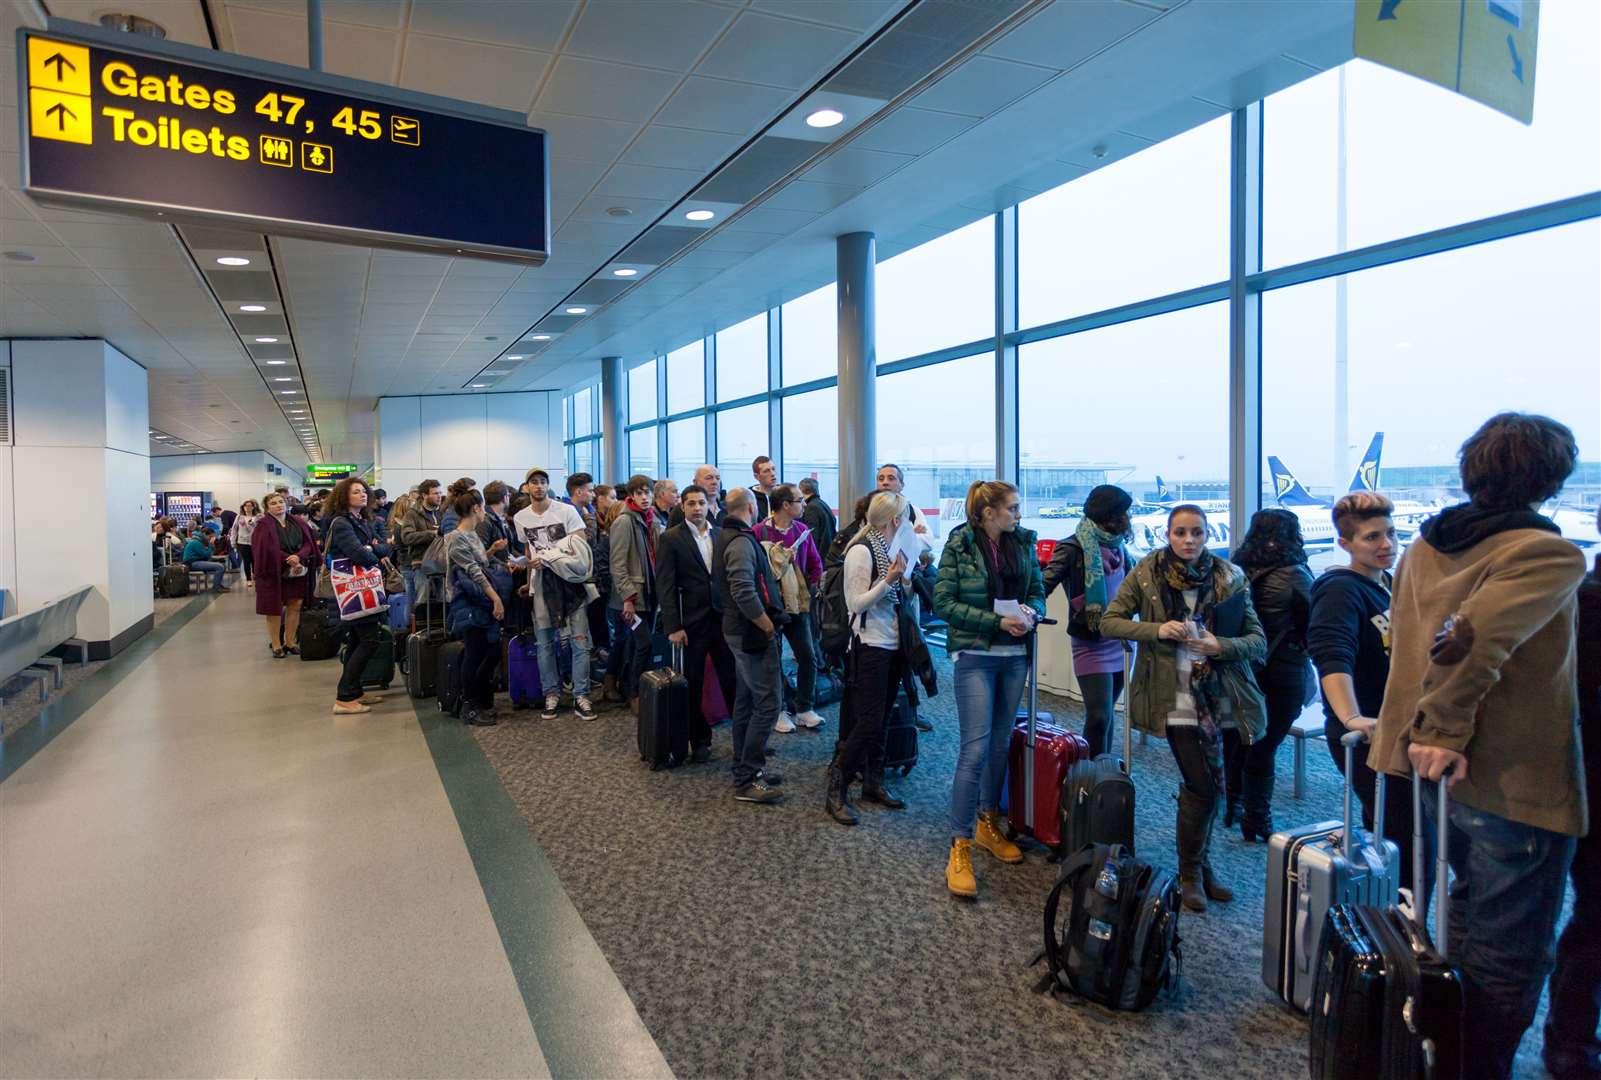 With the school holidays just days away, millions are hoping to escape the UK. Image: iStock.